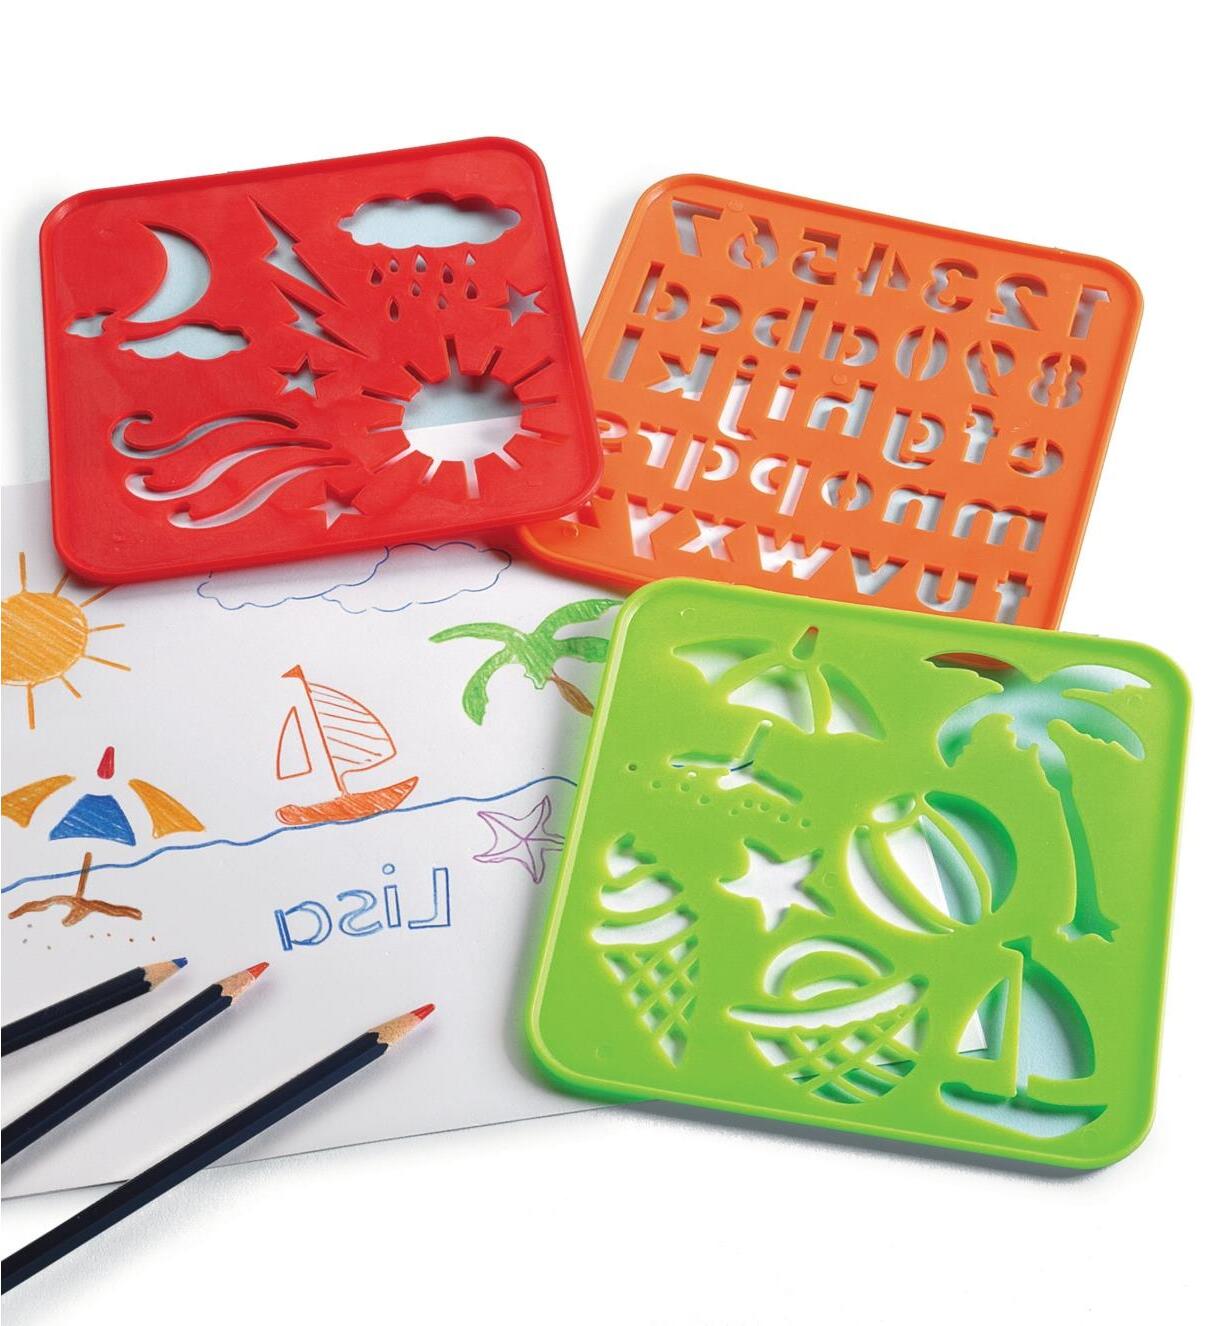 Stencil Set Review: Perfect for Her Crafting Needs